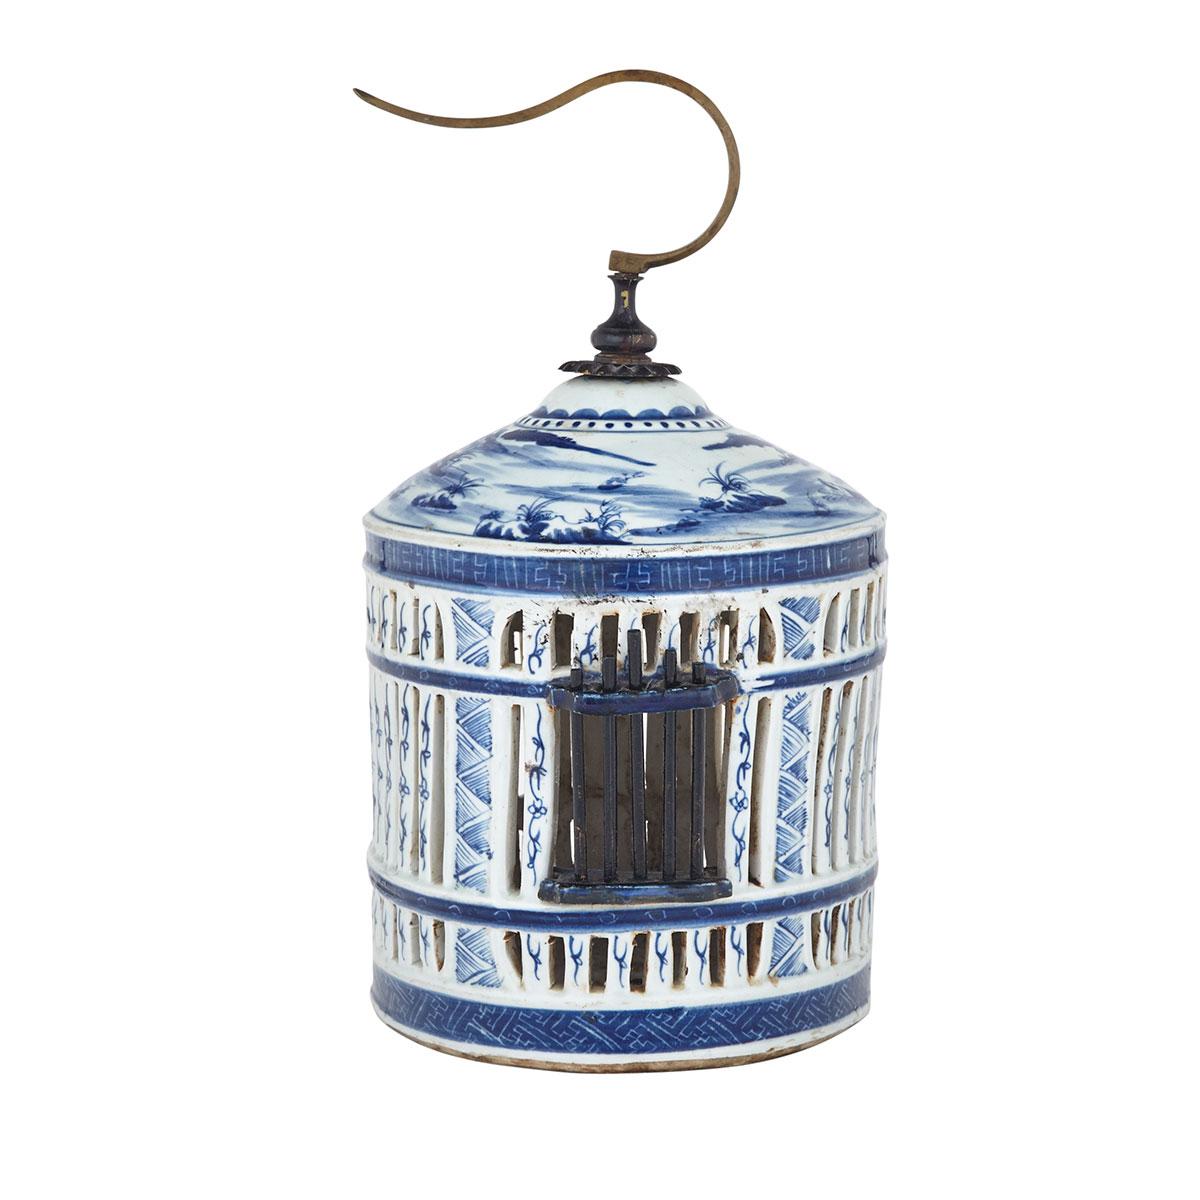 Rare Export Blue and White Birdcage, 19th Century